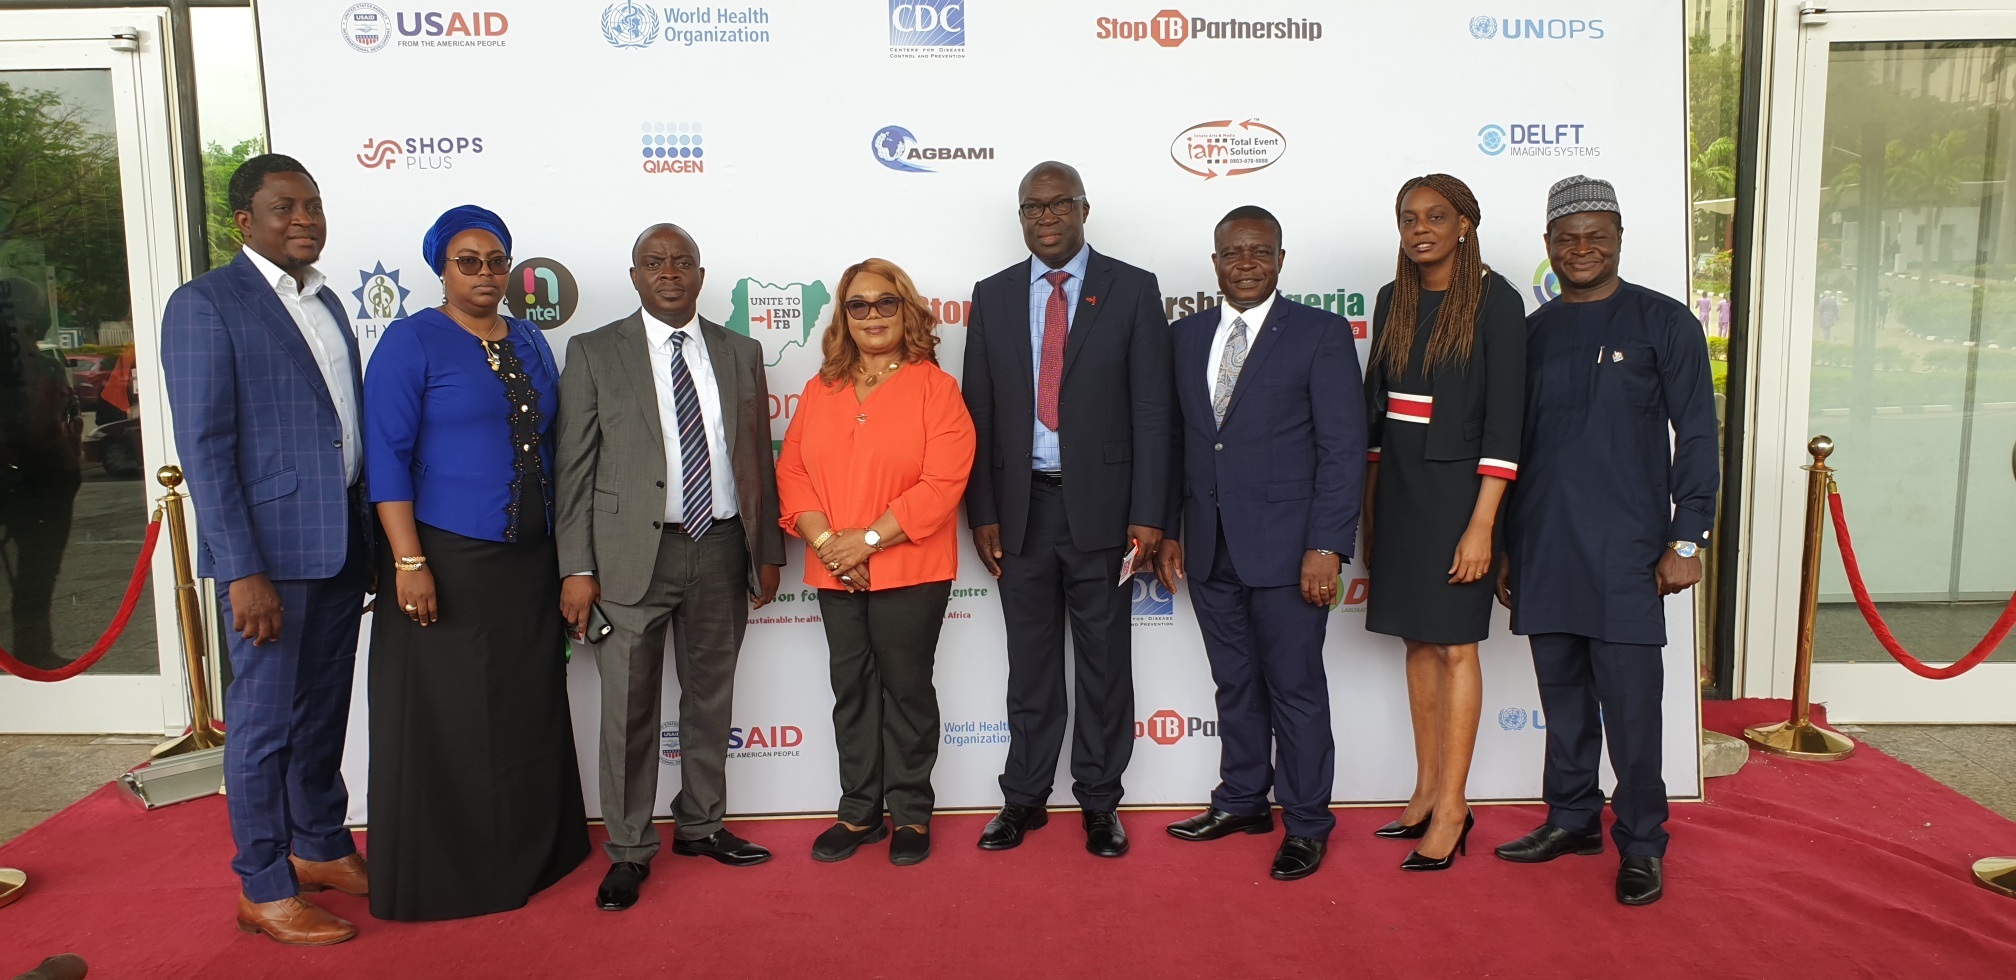 Stakeholders applaud Chevron, Agbami parties at TB National Conference